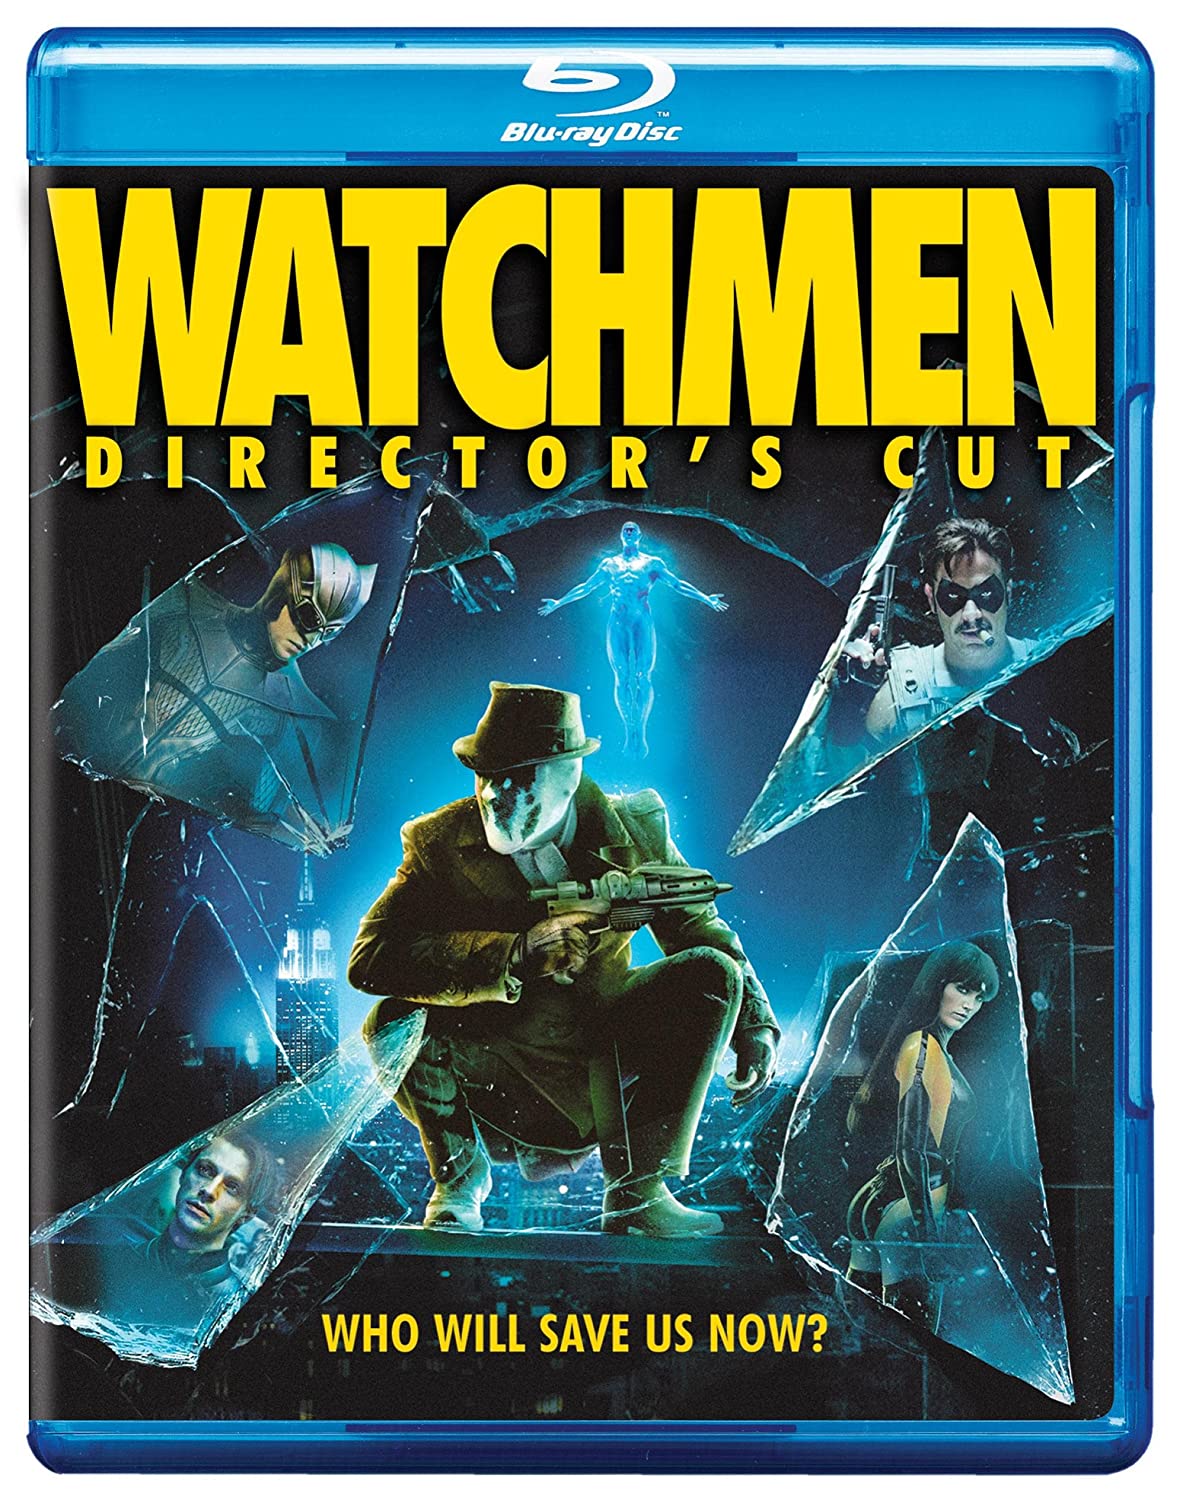 Watchmen Director's Cut - Blu-ray (Used Once)